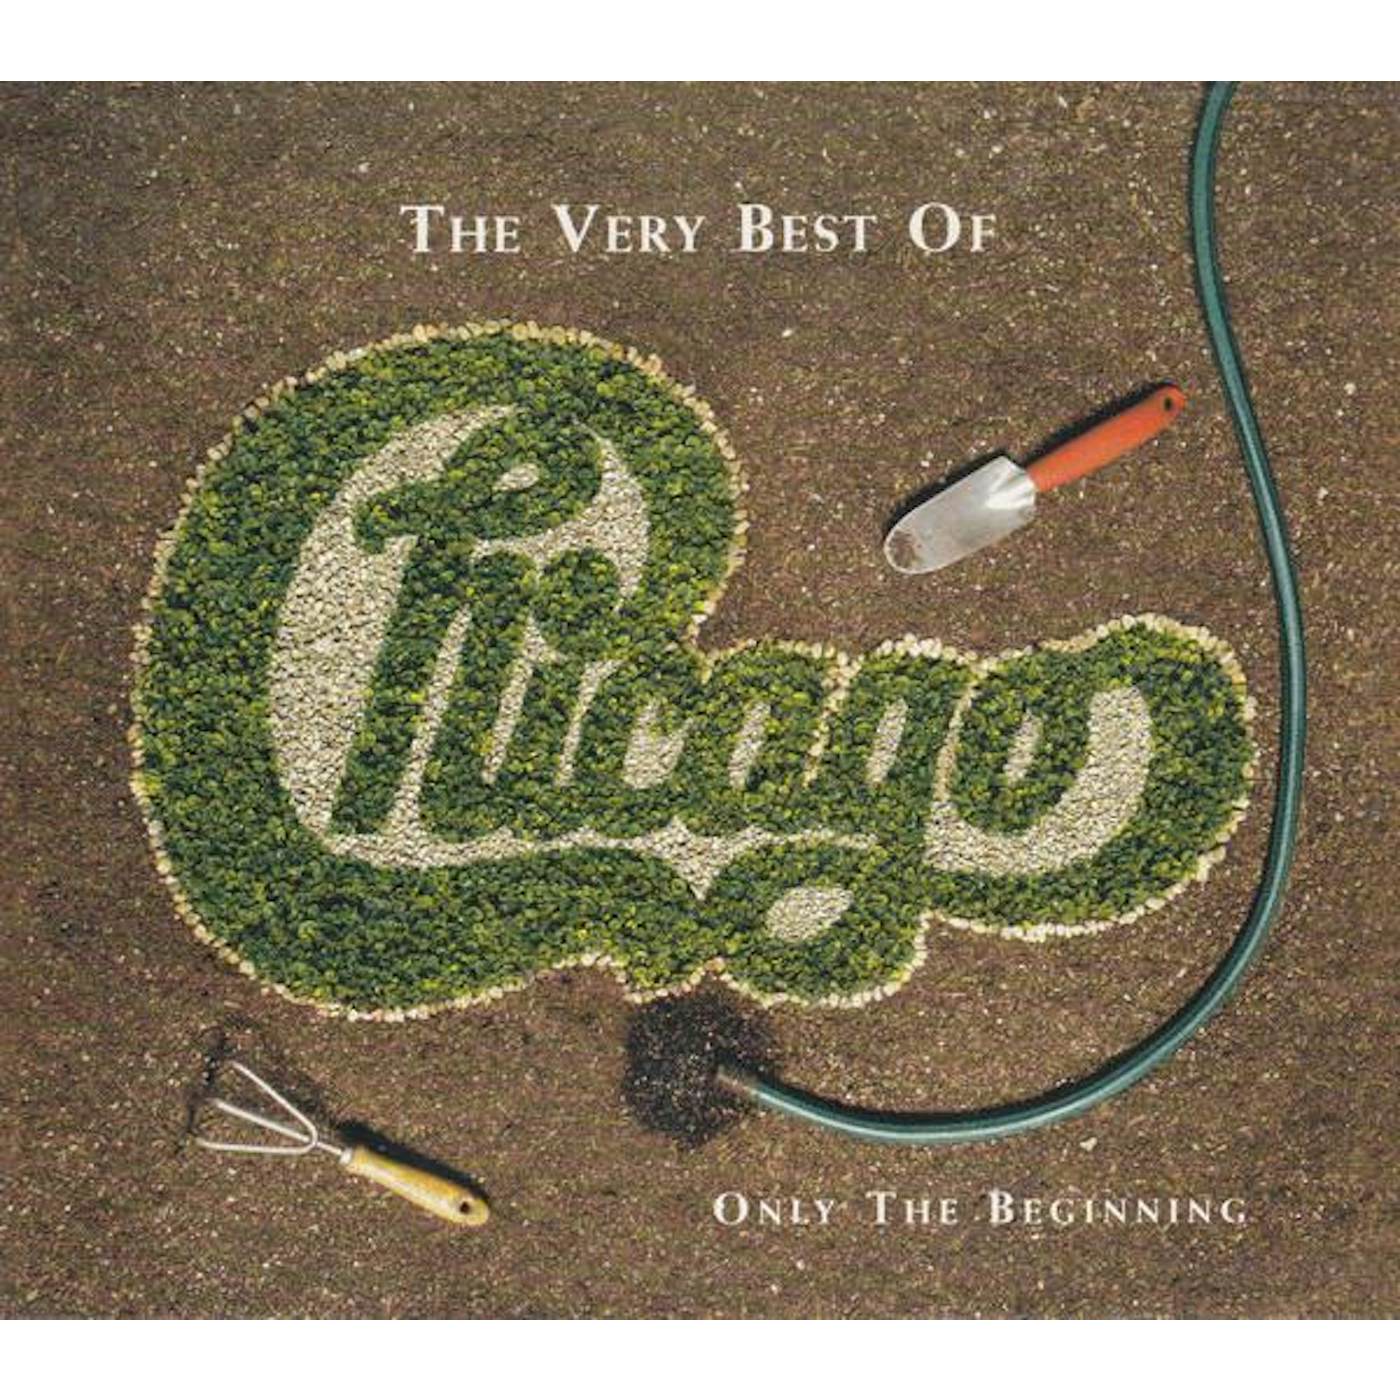 Chicago VERY BEST OF: ONLY THE BEGINNING CD